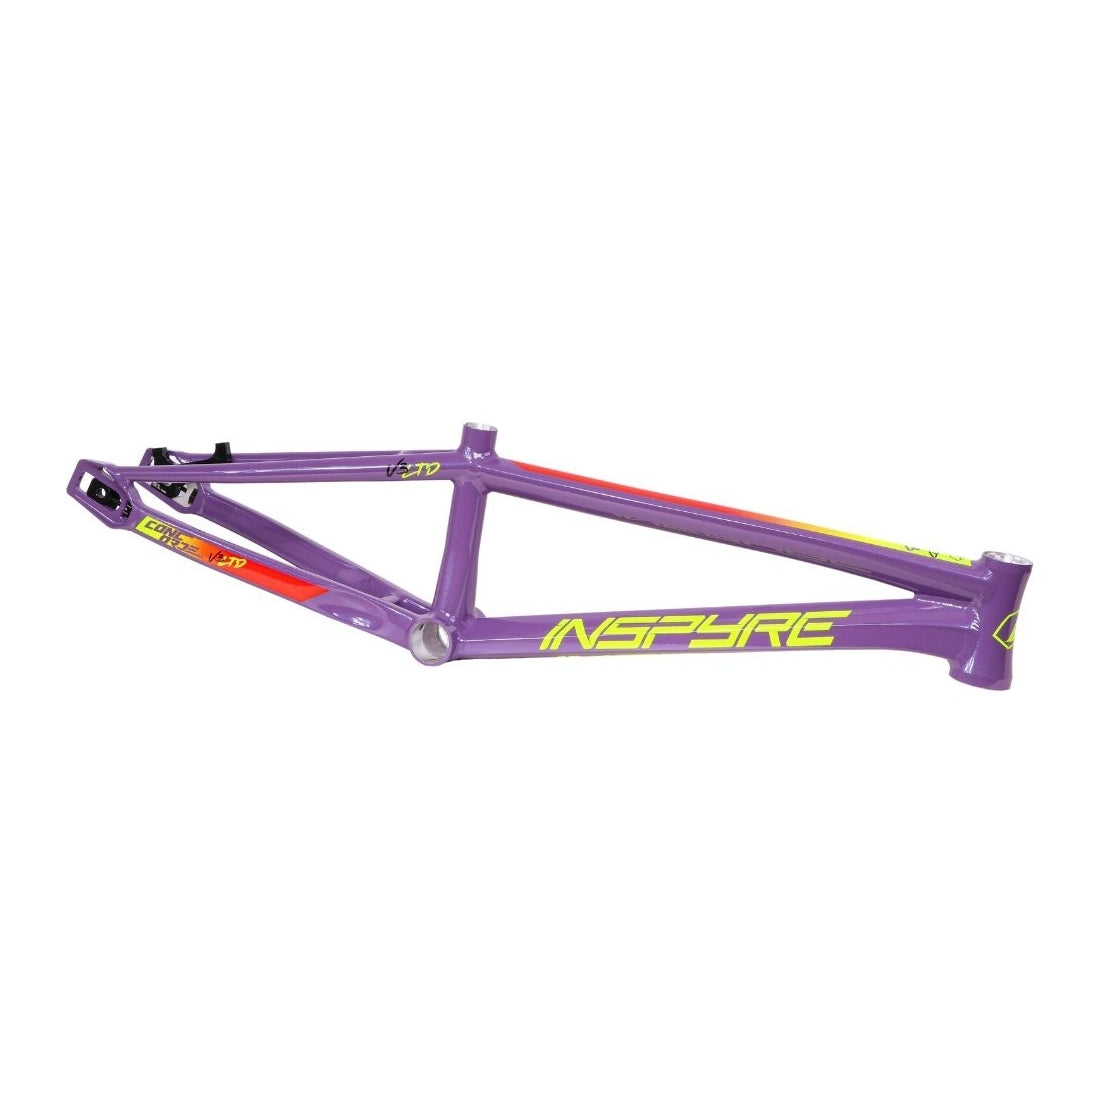 Inspyre Concorde V3 Pro Cruiser Frame with red and yellow decals.